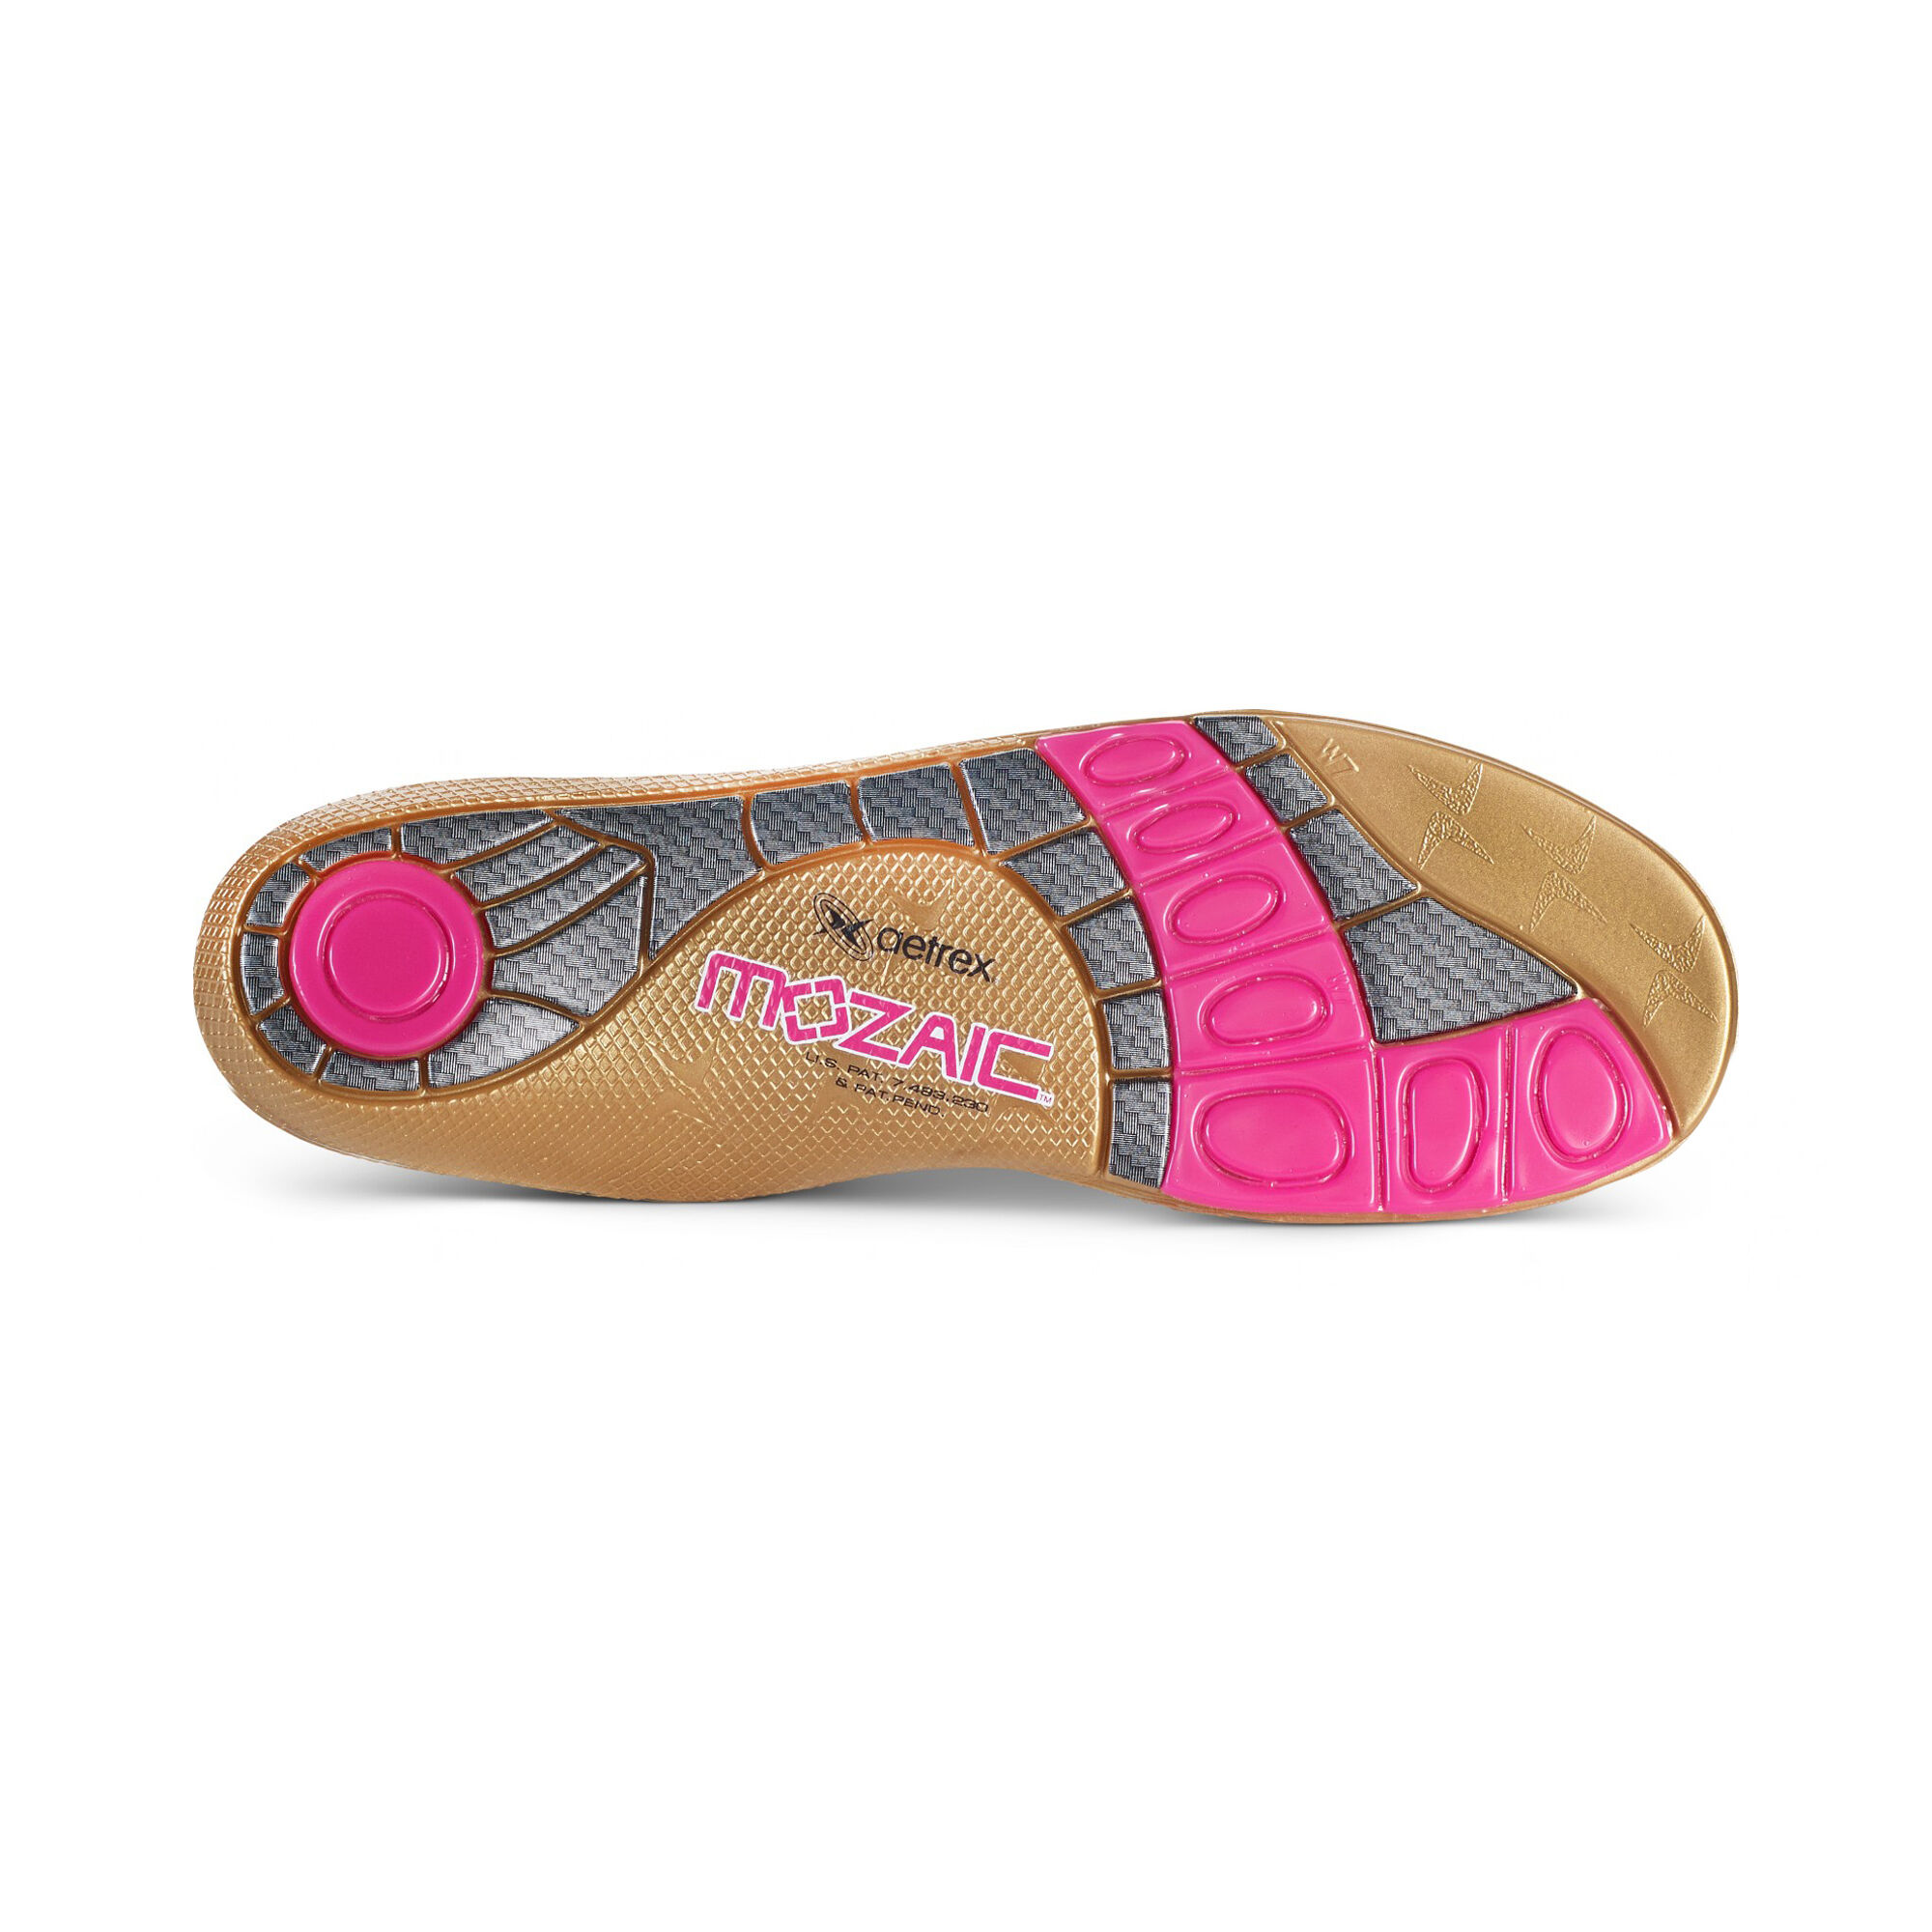 womens shoes with metatarsal support